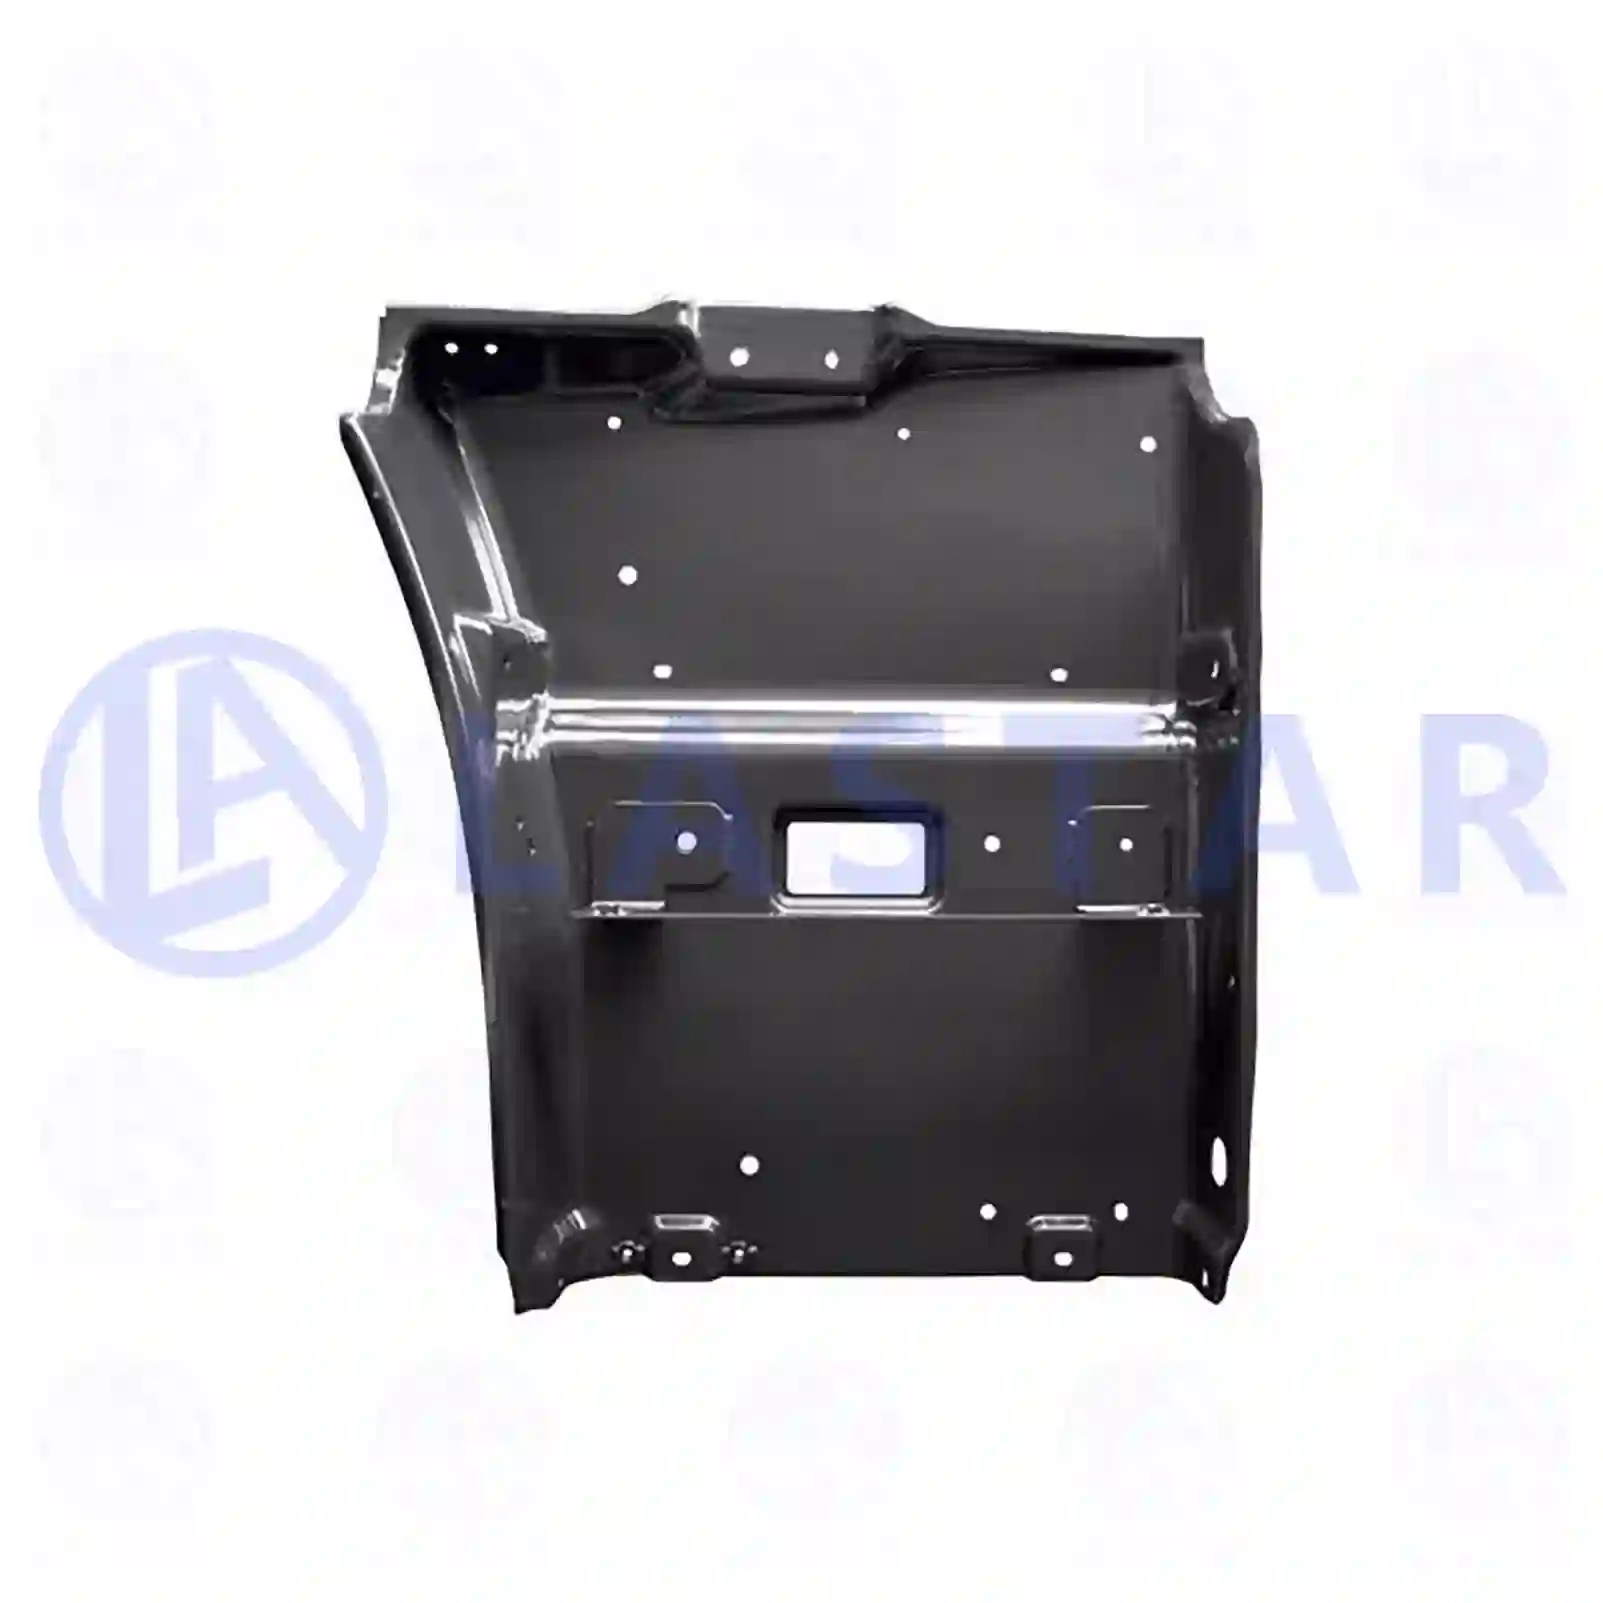 Step well case, right, metal, 77721686, 1498180, ZG61230-0008 ||  77721686 Lastar Spare Part | Truck Spare Parts, Auotomotive Spare Parts Step well case, right, metal, 77721686, 1498180, ZG61230-0008 ||  77721686 Lastar Spare Part | Truck Spare Parts, Auotomotive Spare Parts